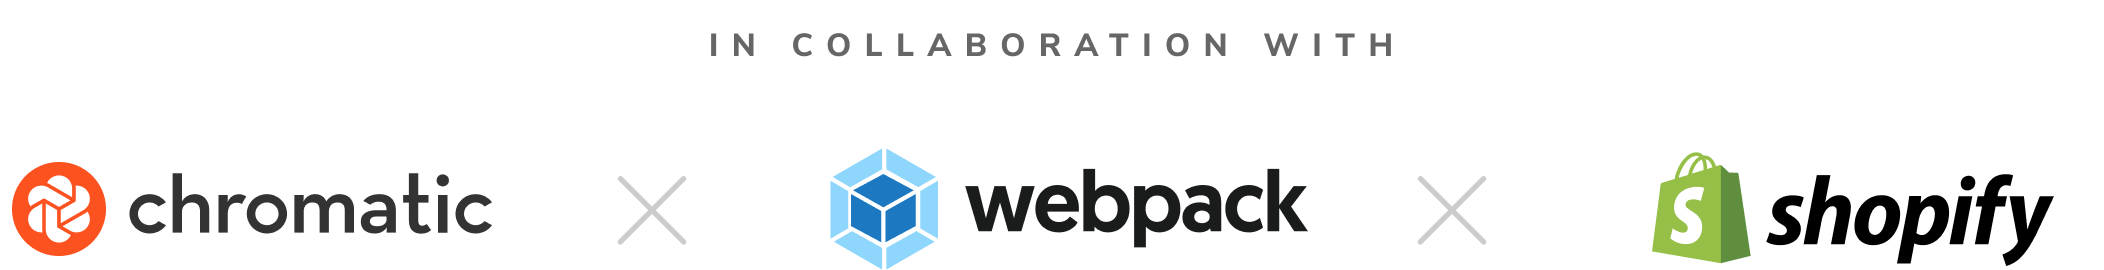 In collaboration with Chromatic, webpack, Shopify